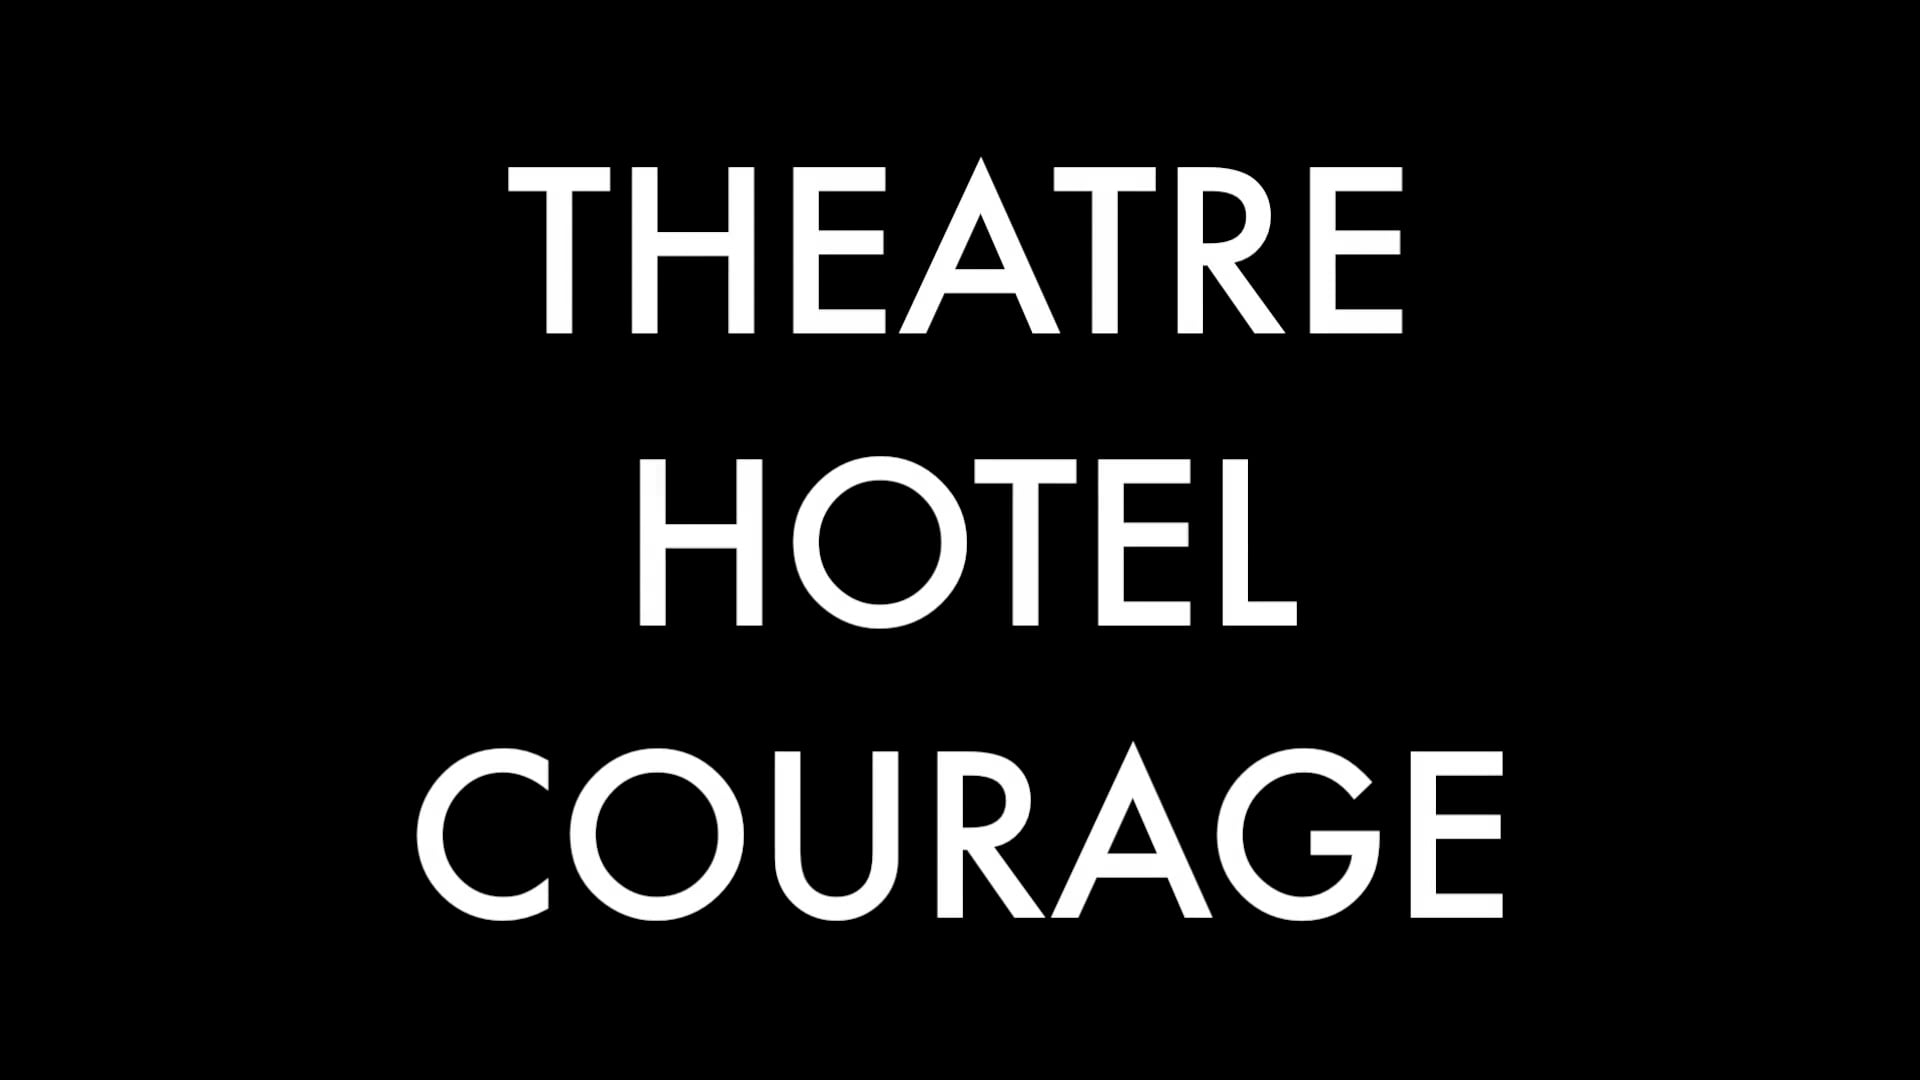 Troupe Courage